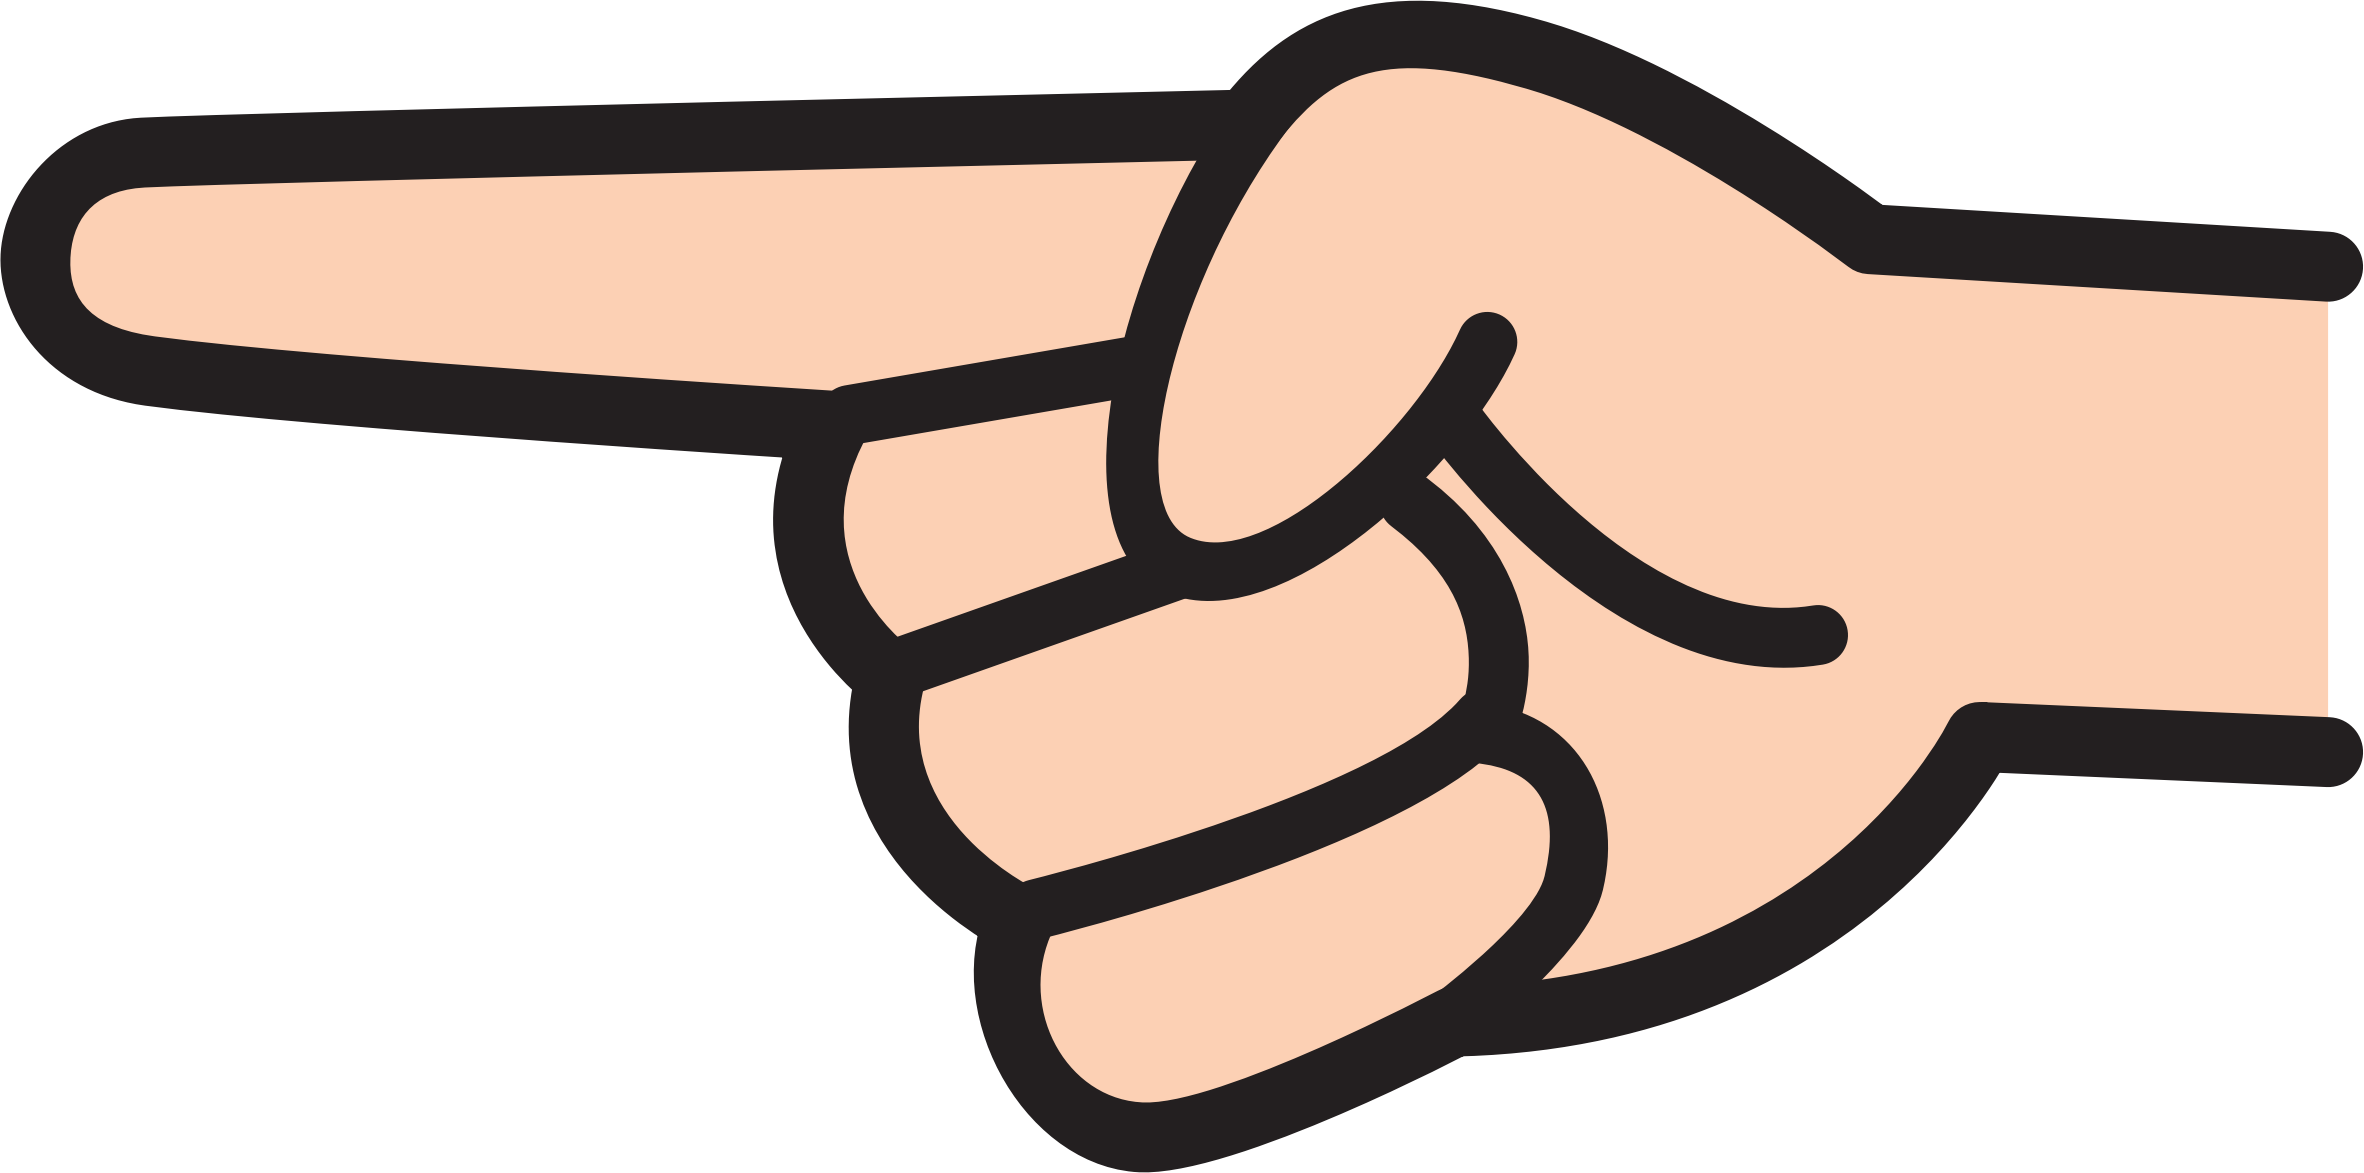 Finger Pointing Right Clipart Pointing Finger Icon Png Transparent